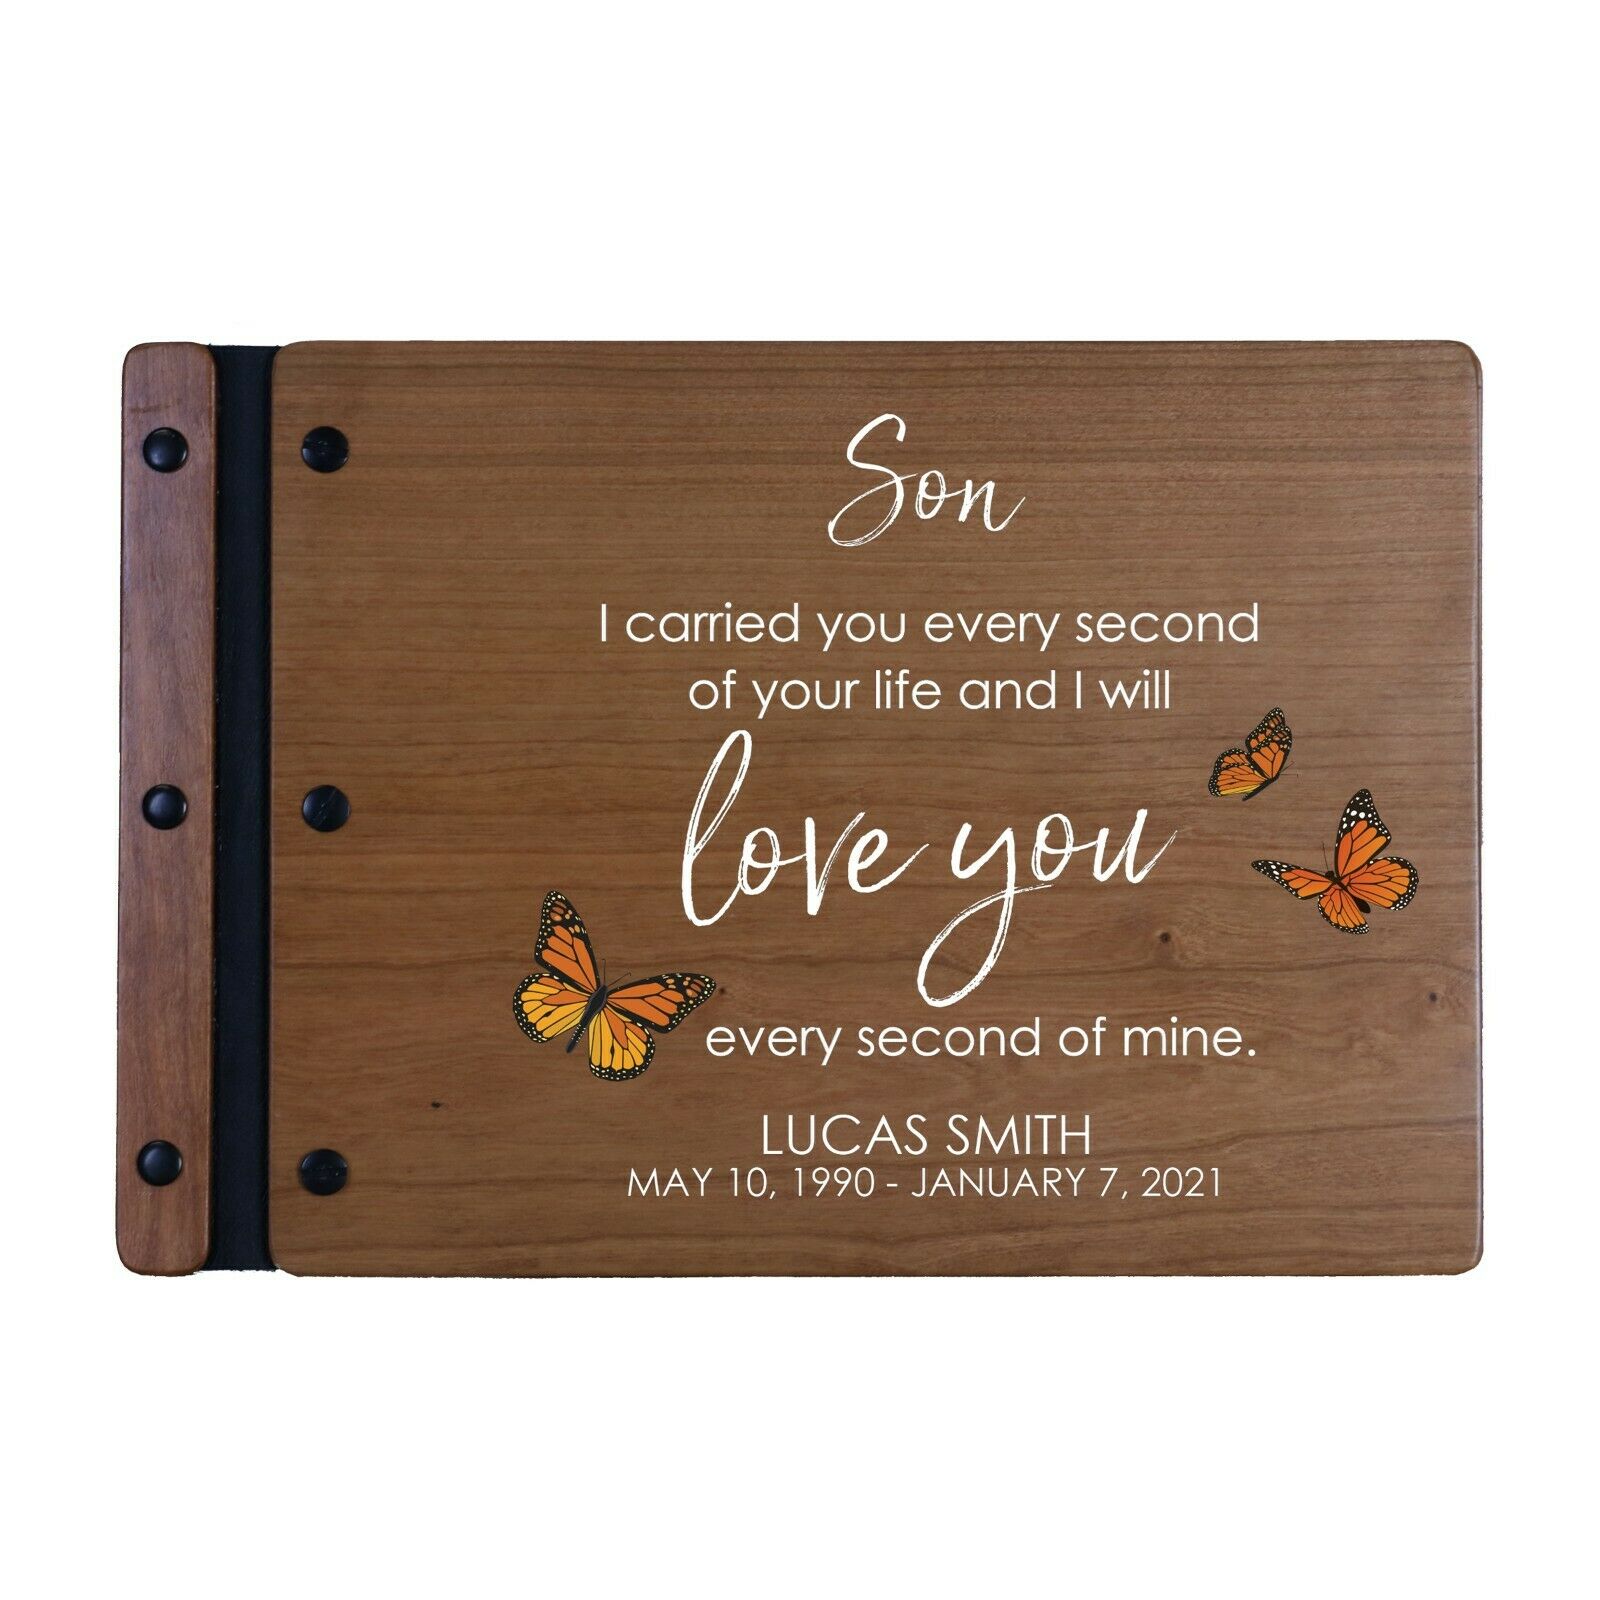 Custom Memorial Funeral Guest Book For Loss Of Loved One 12x8 - I Carried You